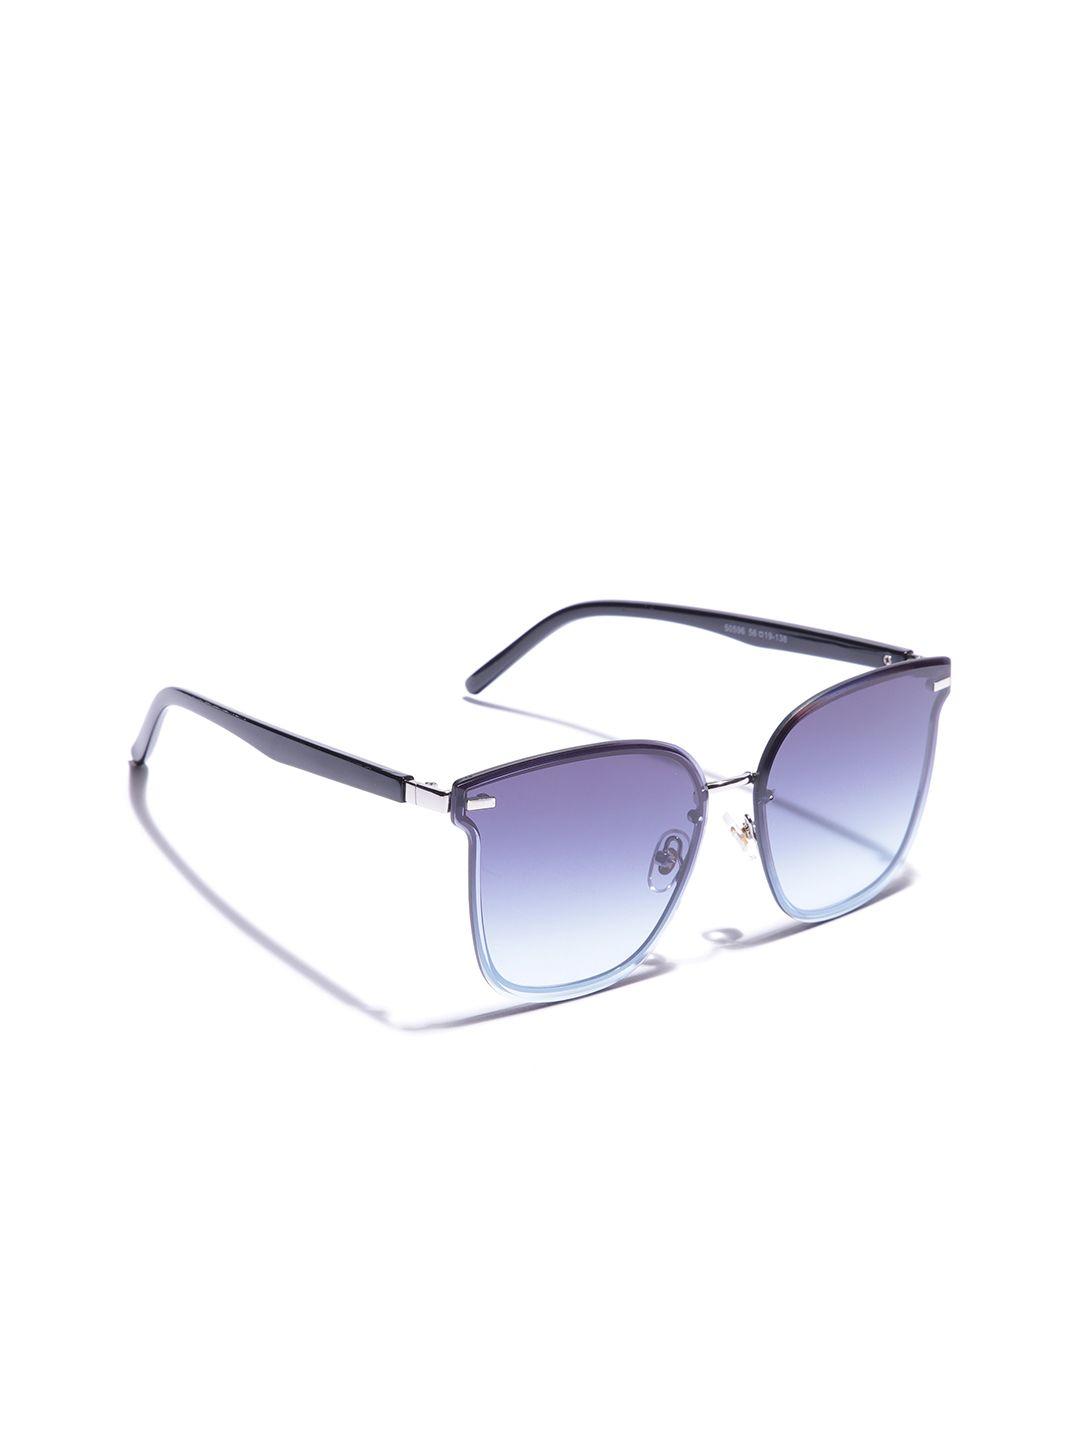 carlton london unisex blue lens & silver-toned rectangle sunglasses with uv protected lens